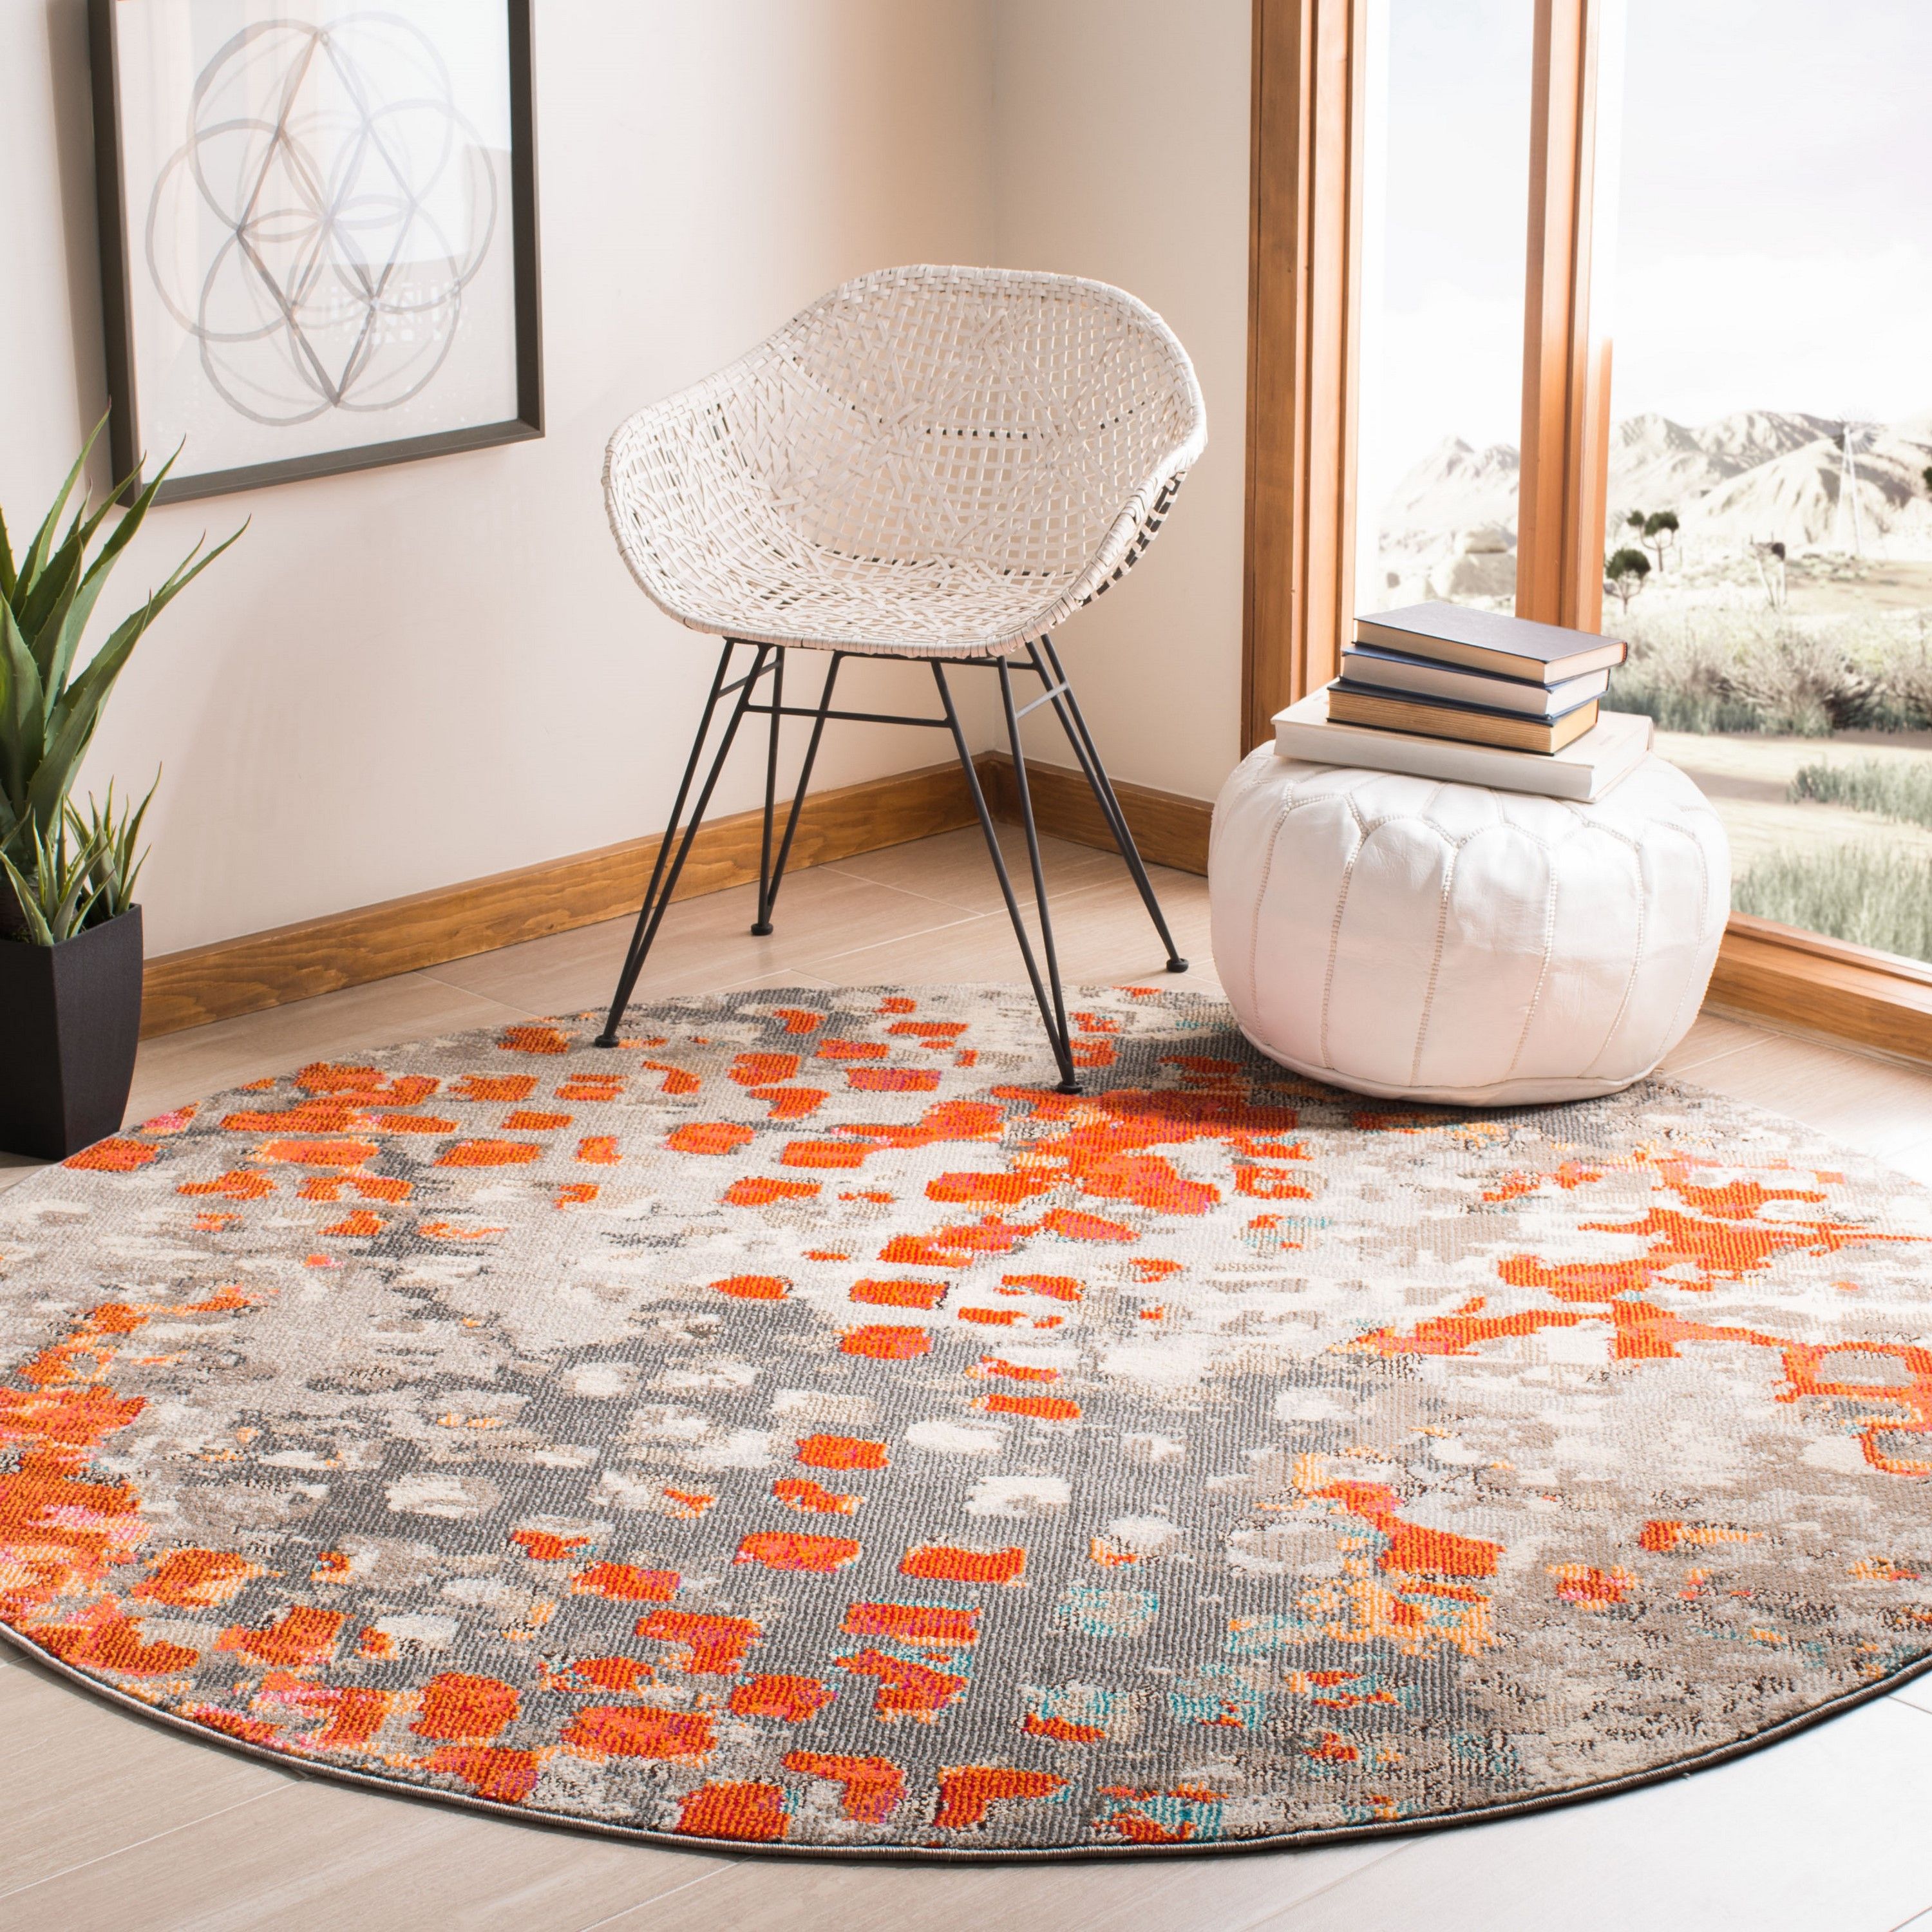 Safavieh 4 X 4 Gray/orange Round Indoor Abstract Bohemian/eclectic Area Rug  In The Rugs Department At Lowes Throughout Orange Round Rugs (View 7 of 15)